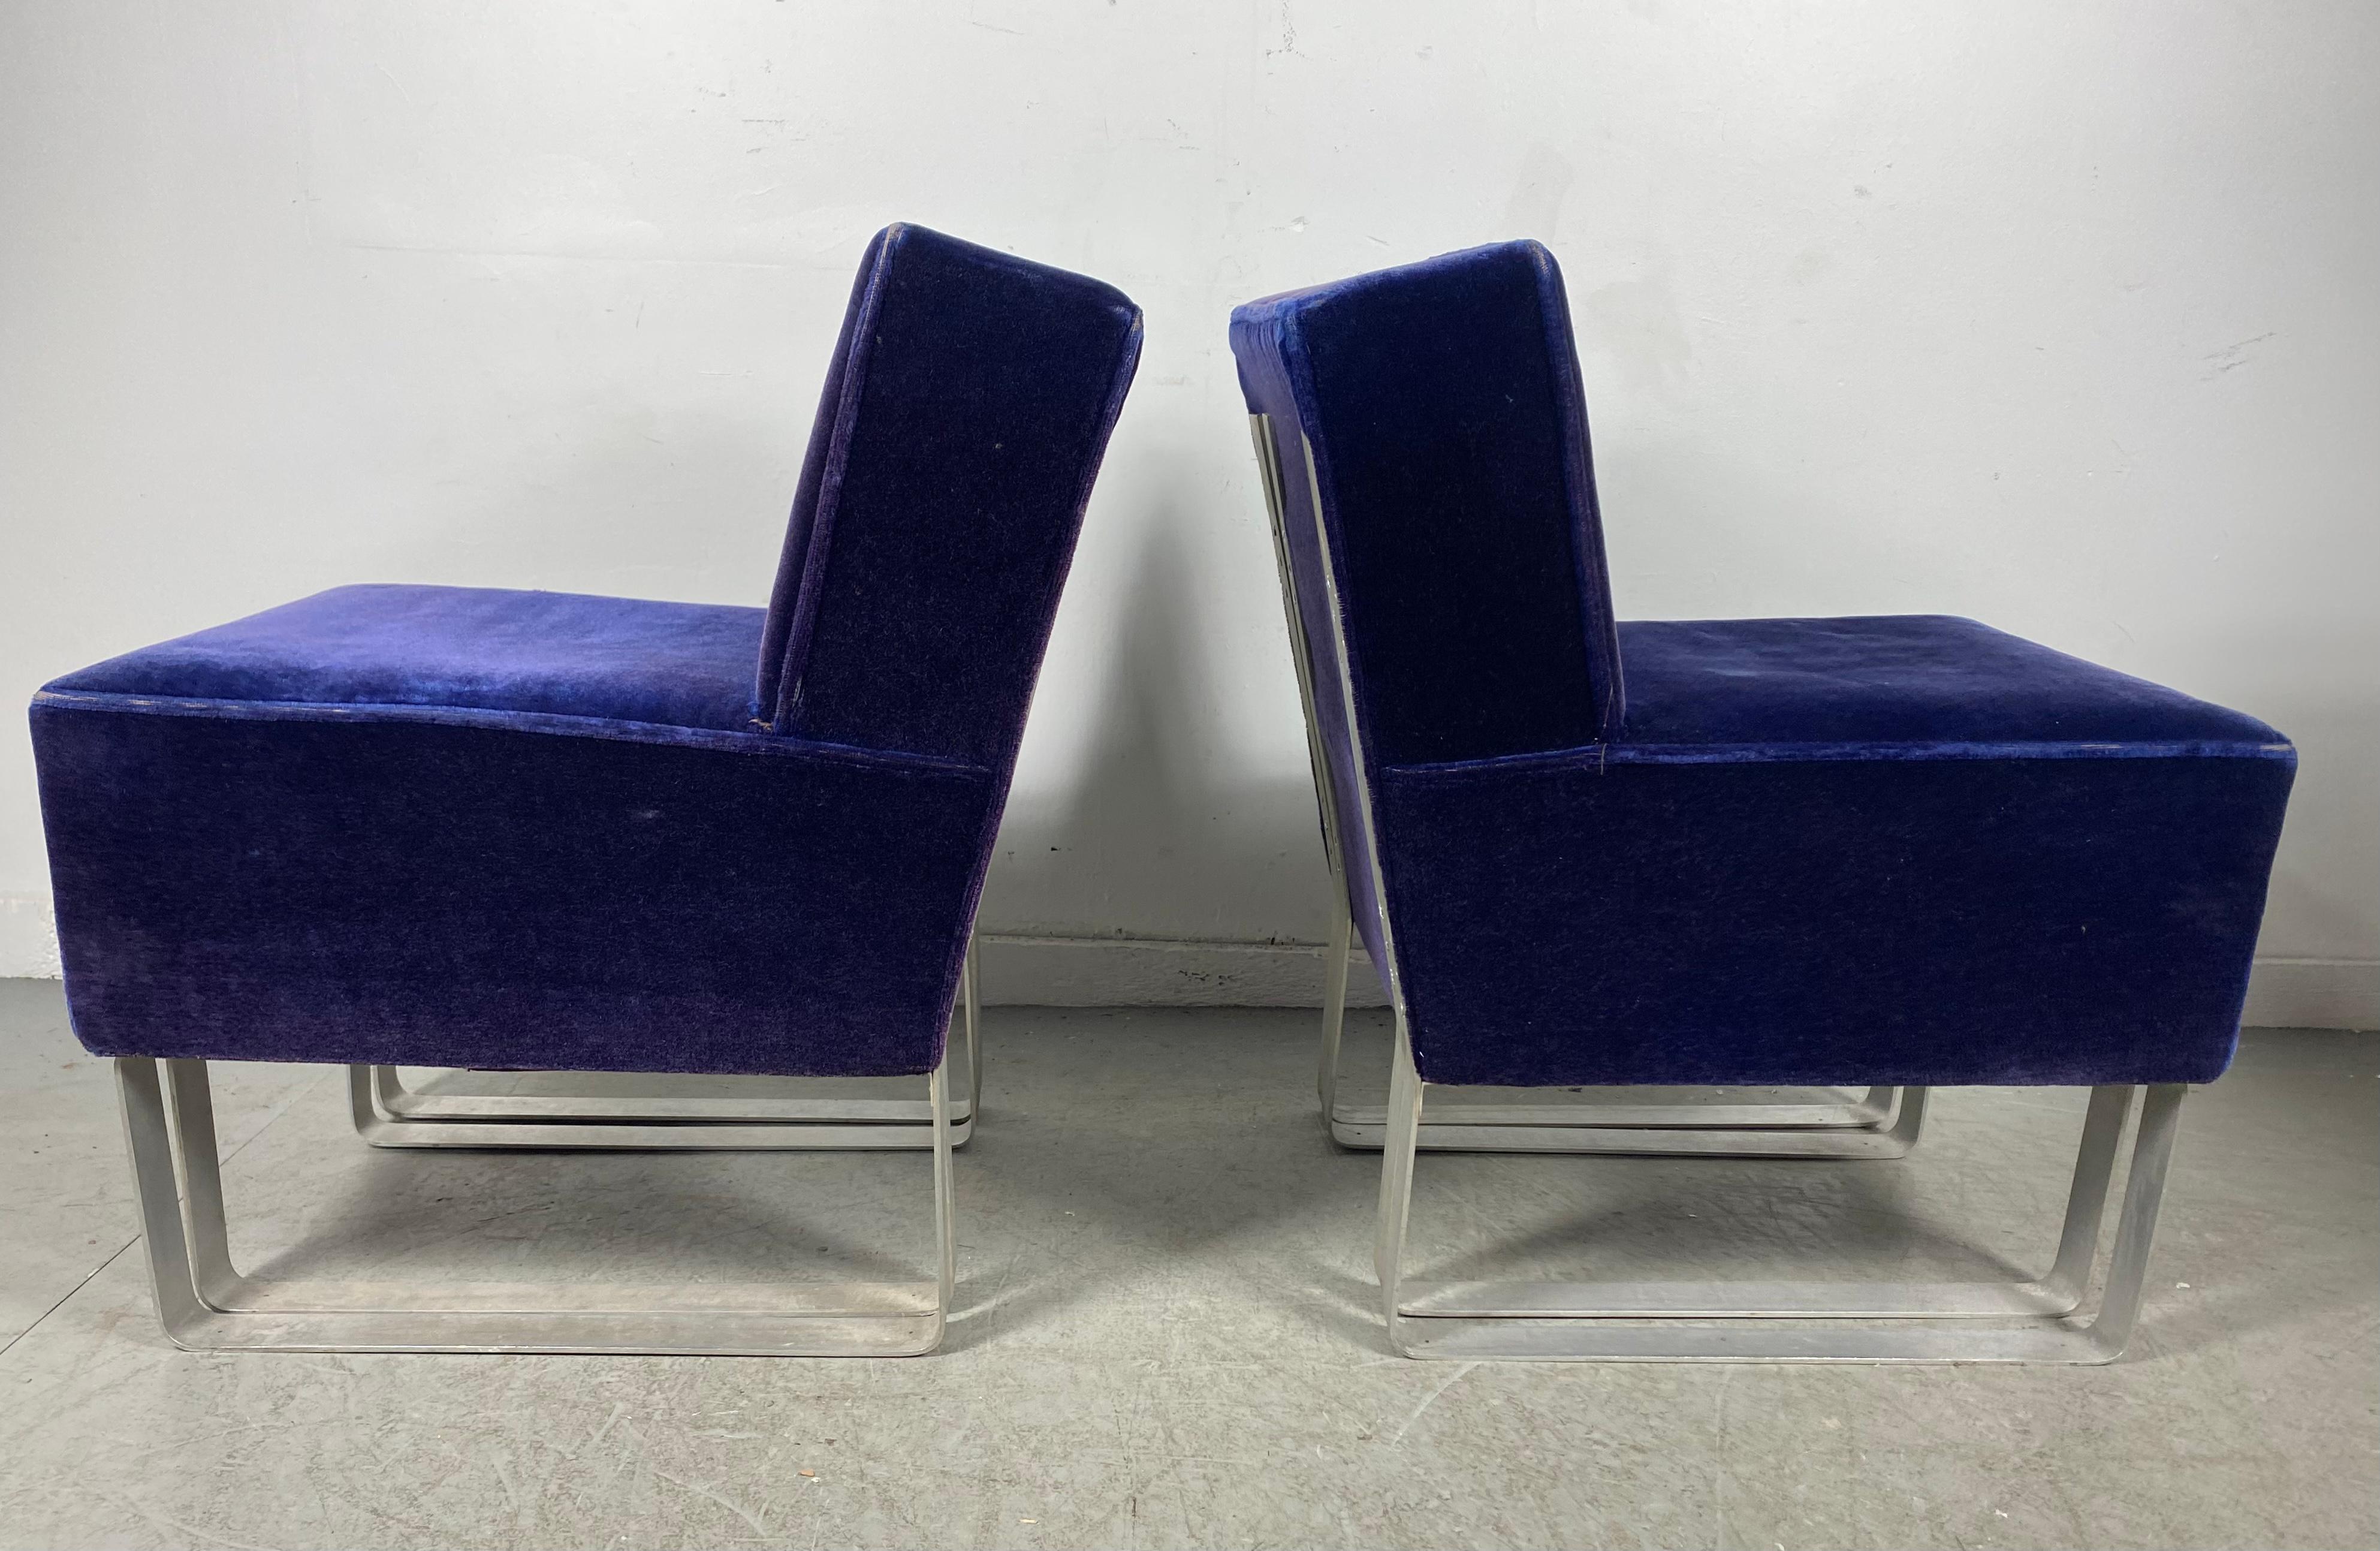 Early 20th Century Rare Modernist Slipper Chairs by Donald Deskey for Deskey -Vollmer For Sale